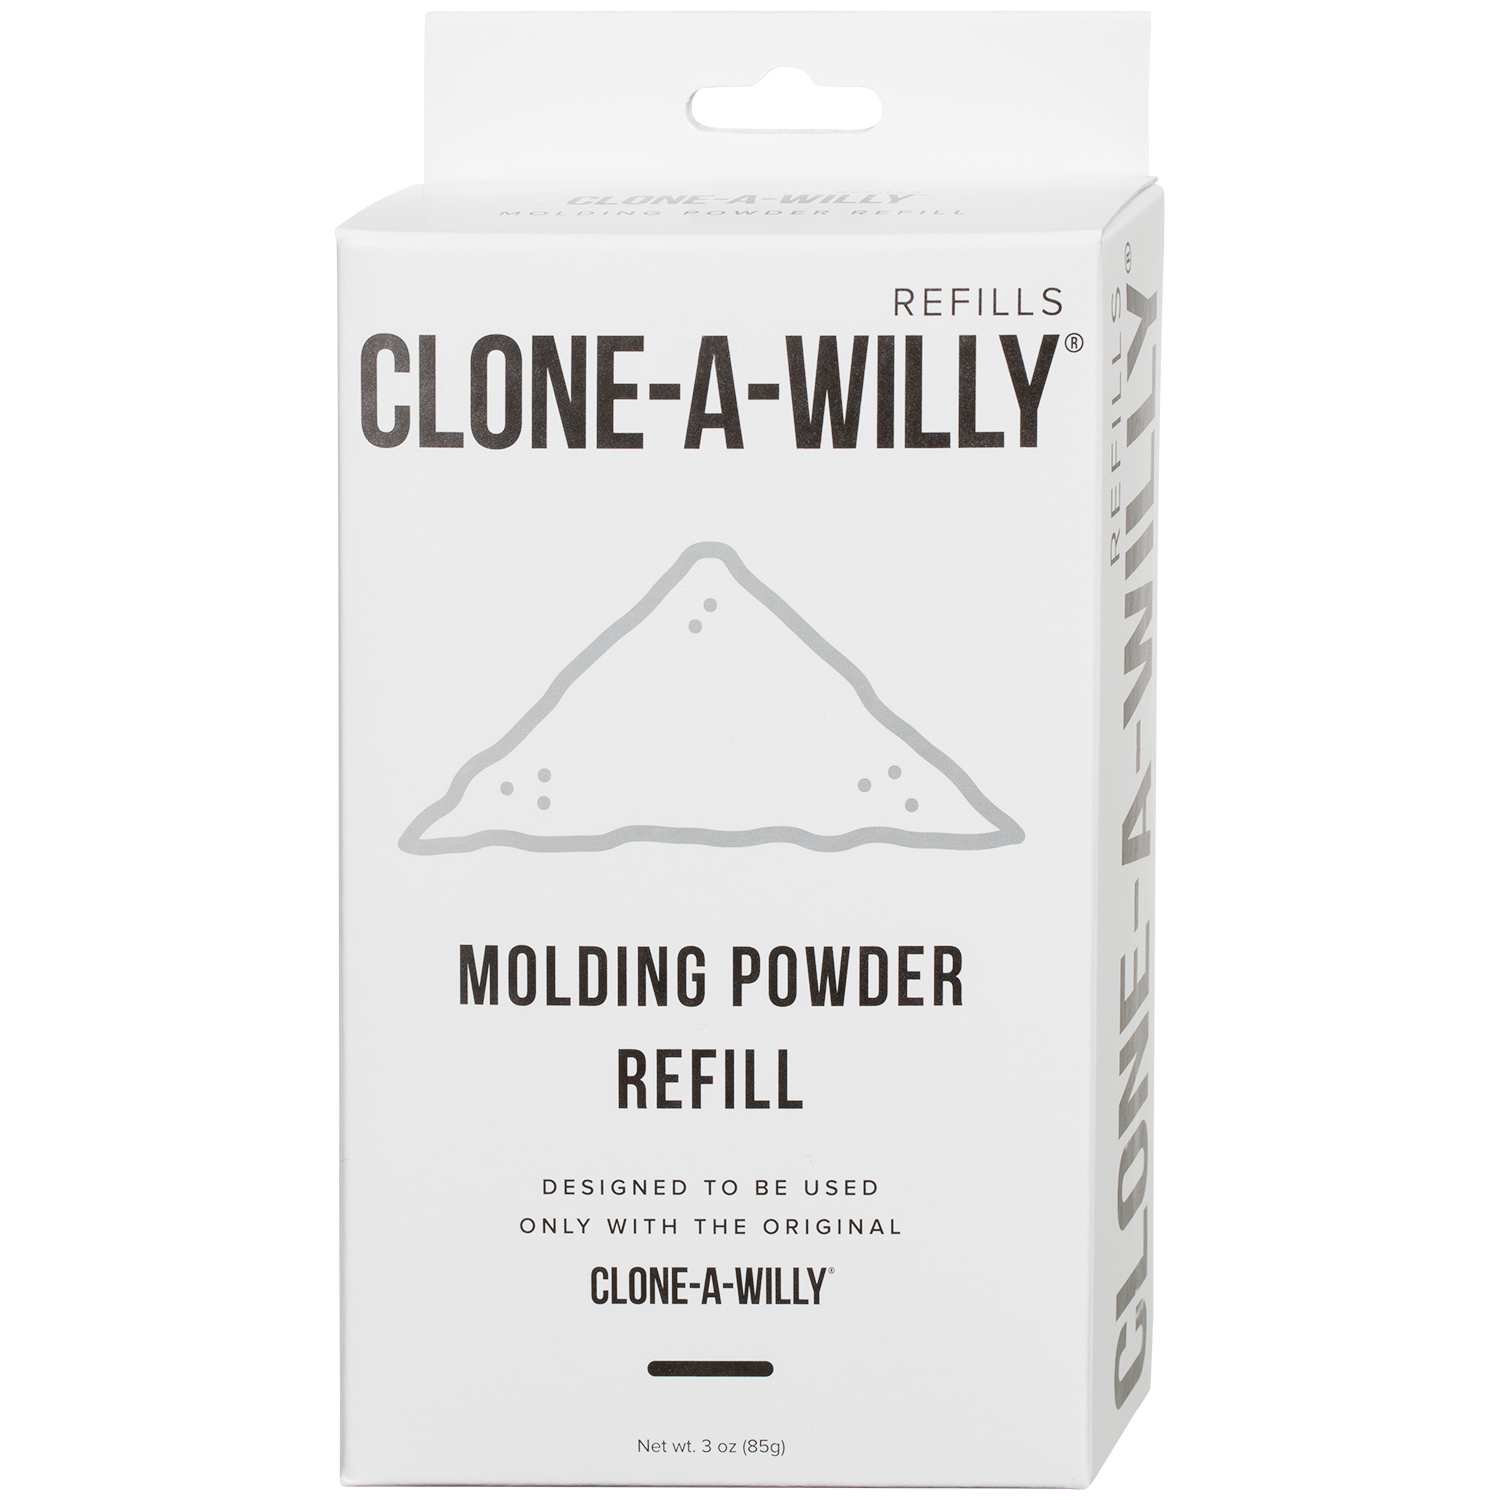 Clone-A-Willy Penis Molding Refill Powder